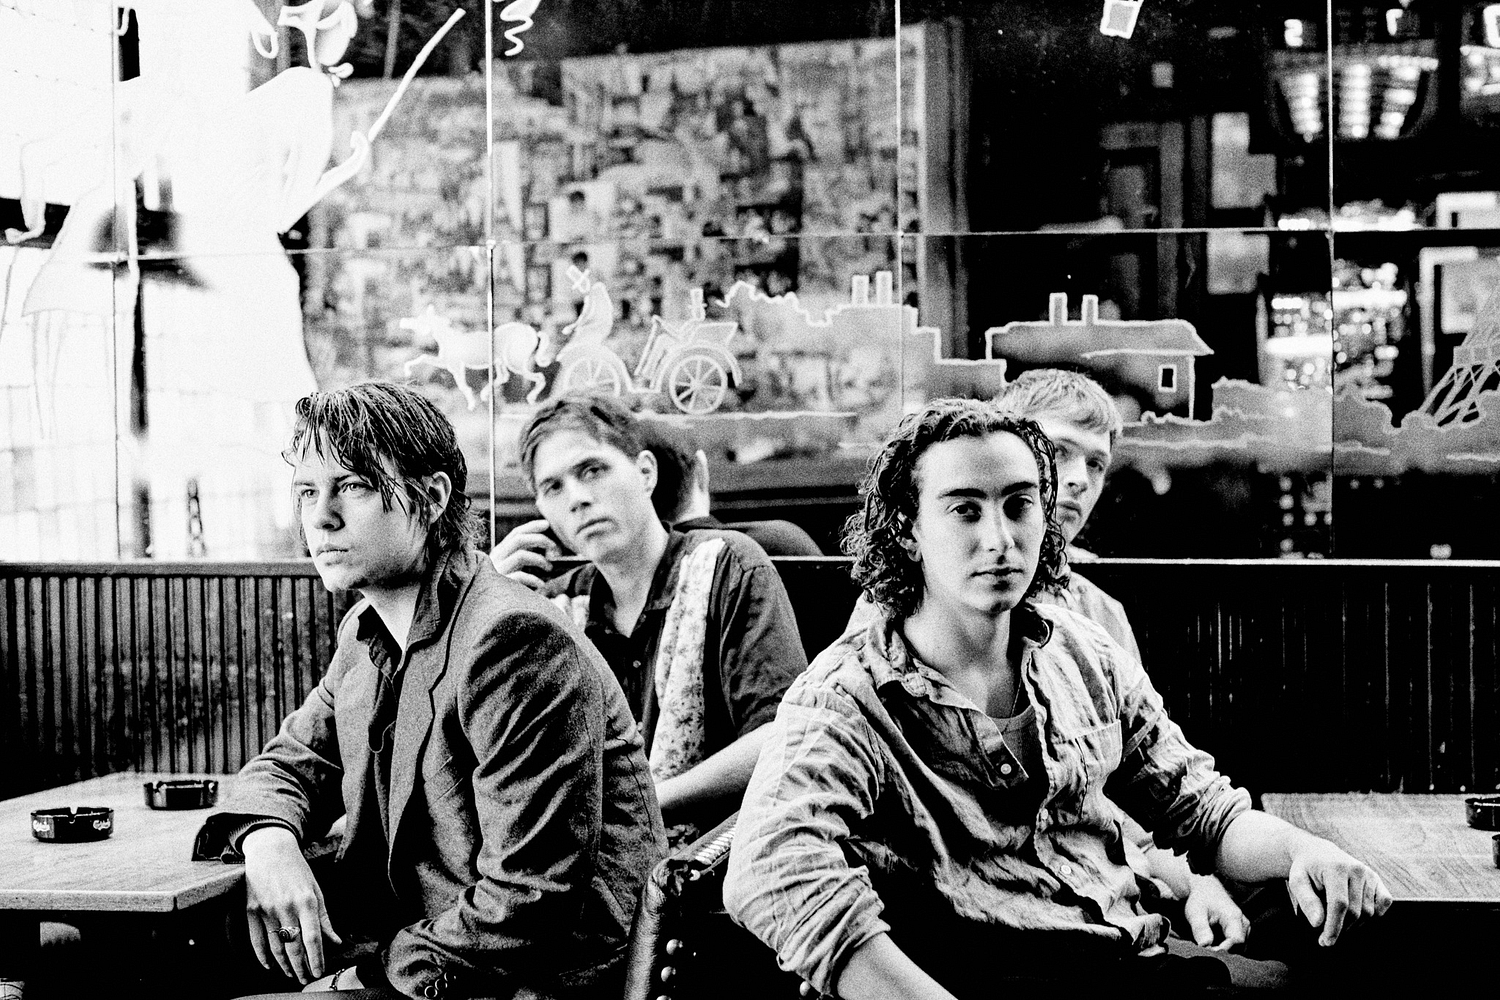 Iceage share new track ‘Take It All’